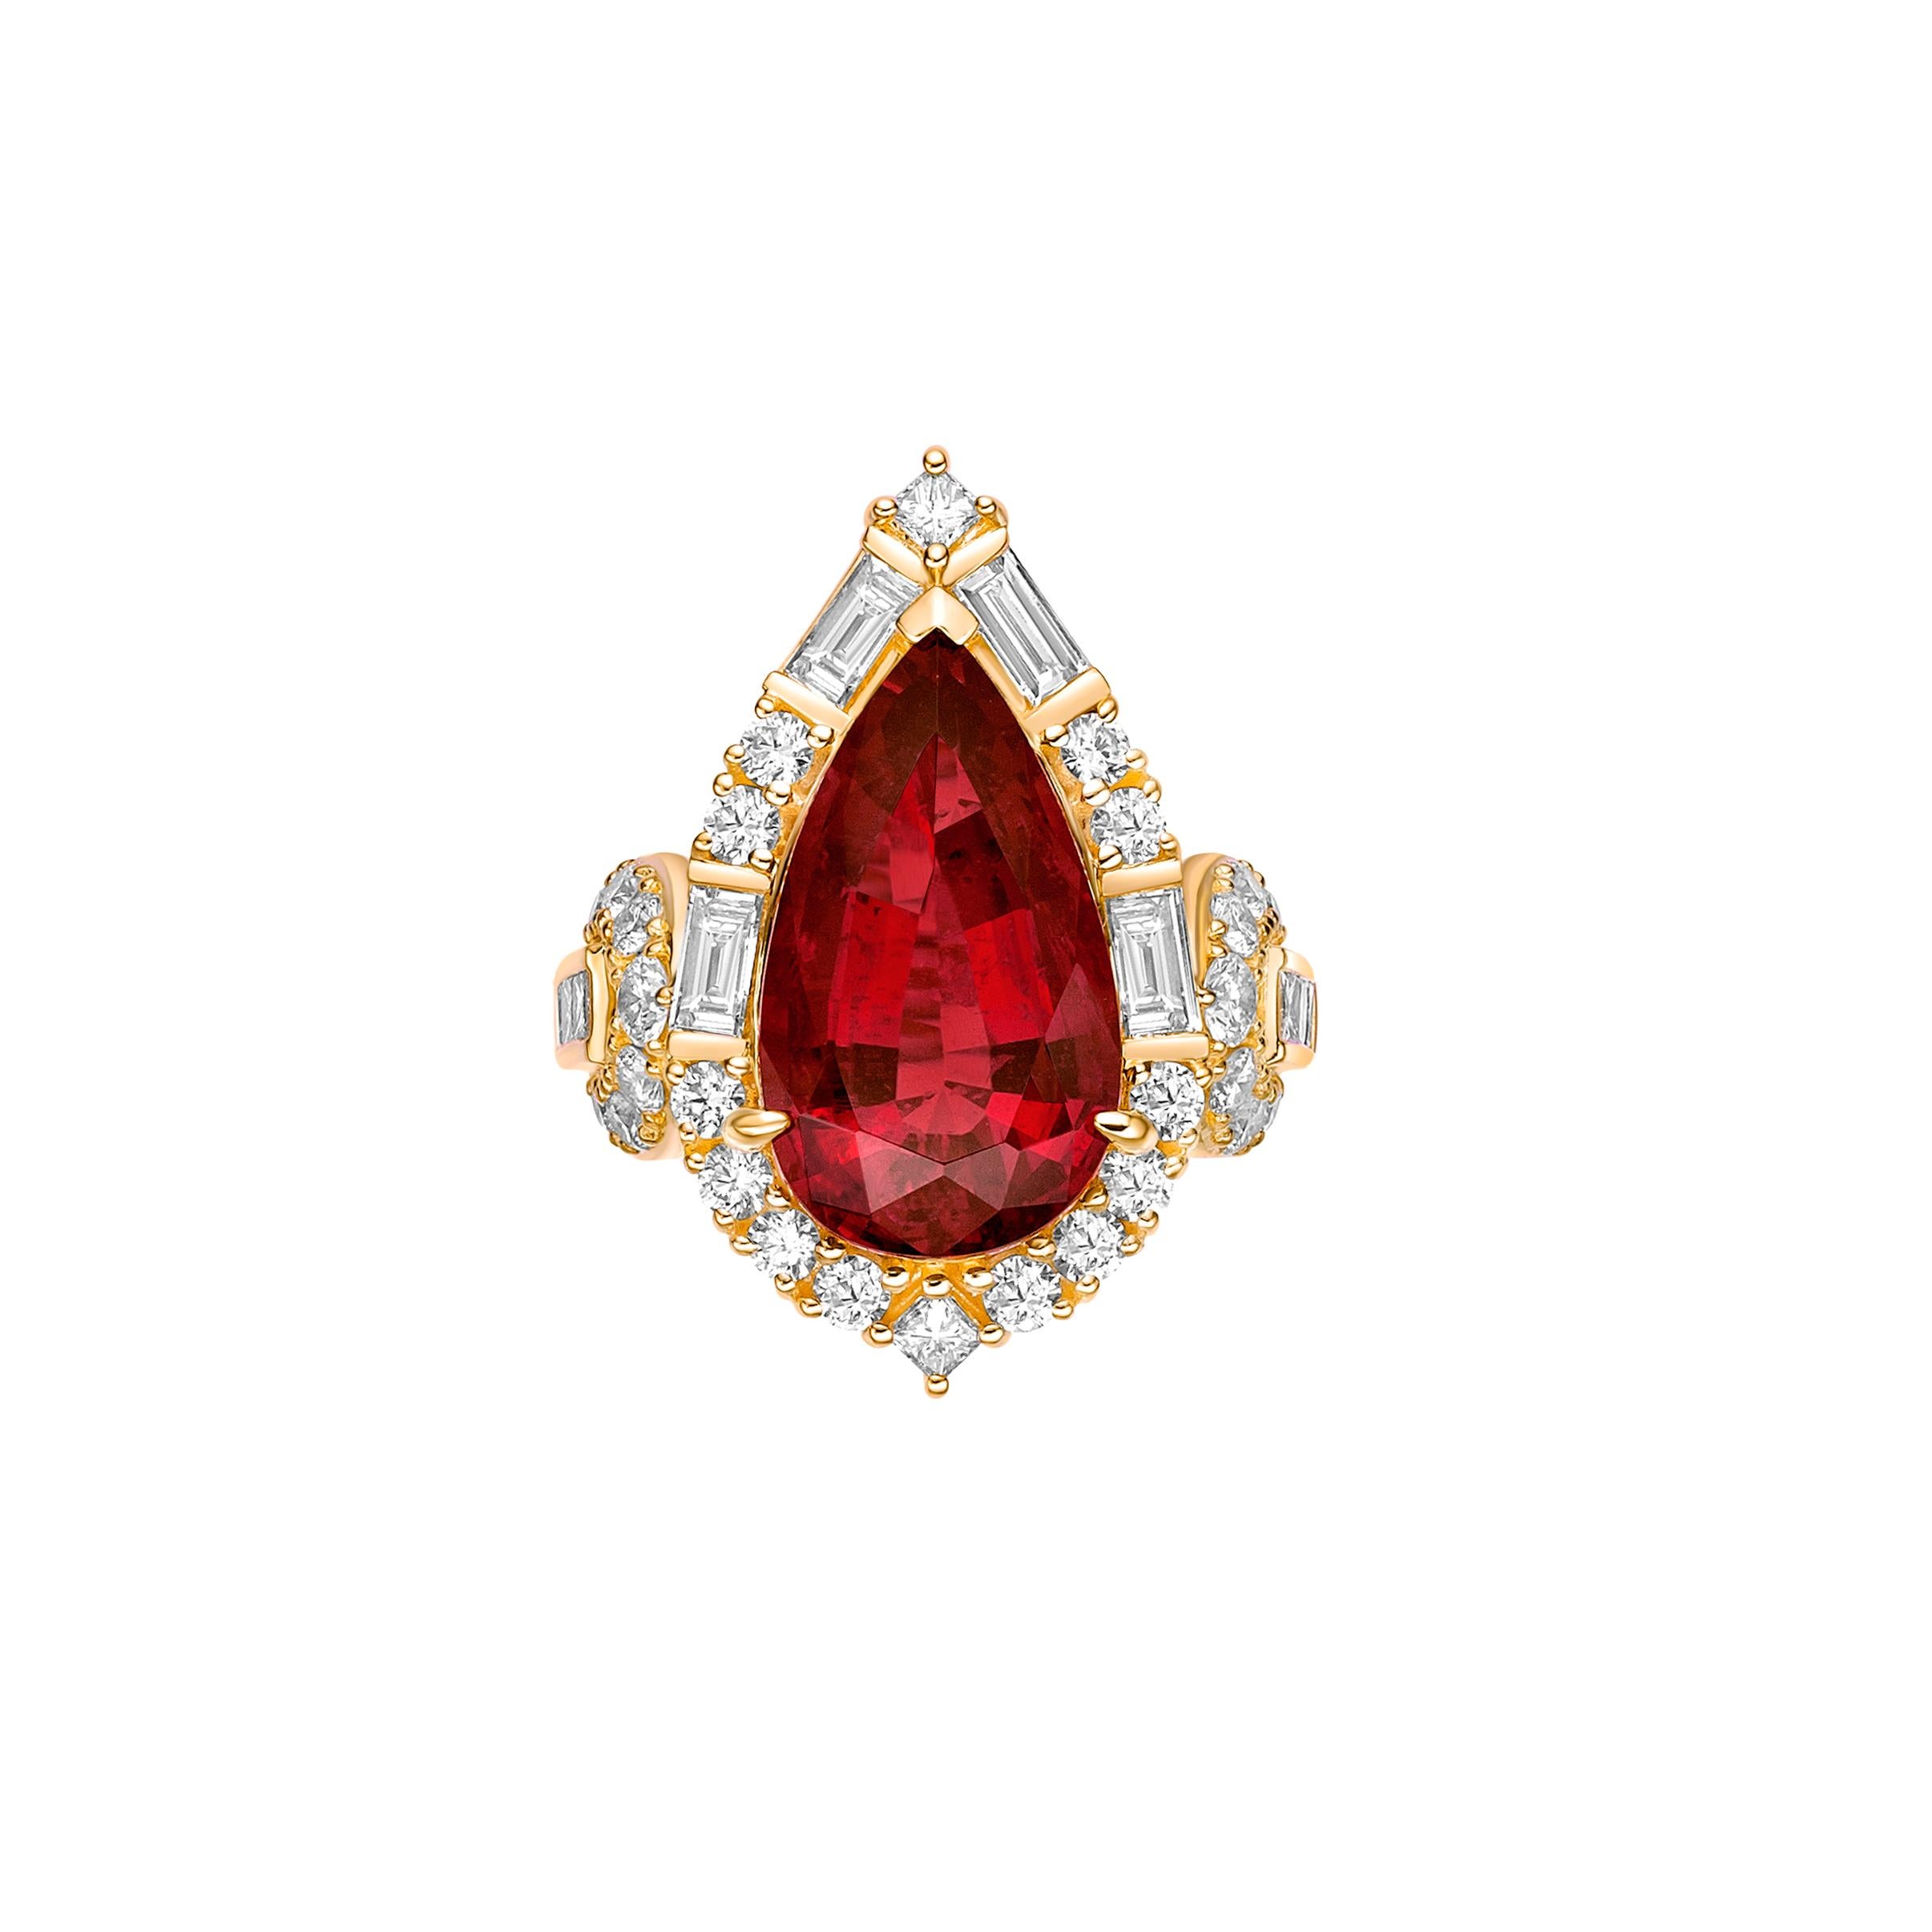 Contemporary 6.796 Carat Rubelite Fancy Ring in 18Karat Yellow Gold with White Diamond. For Sale